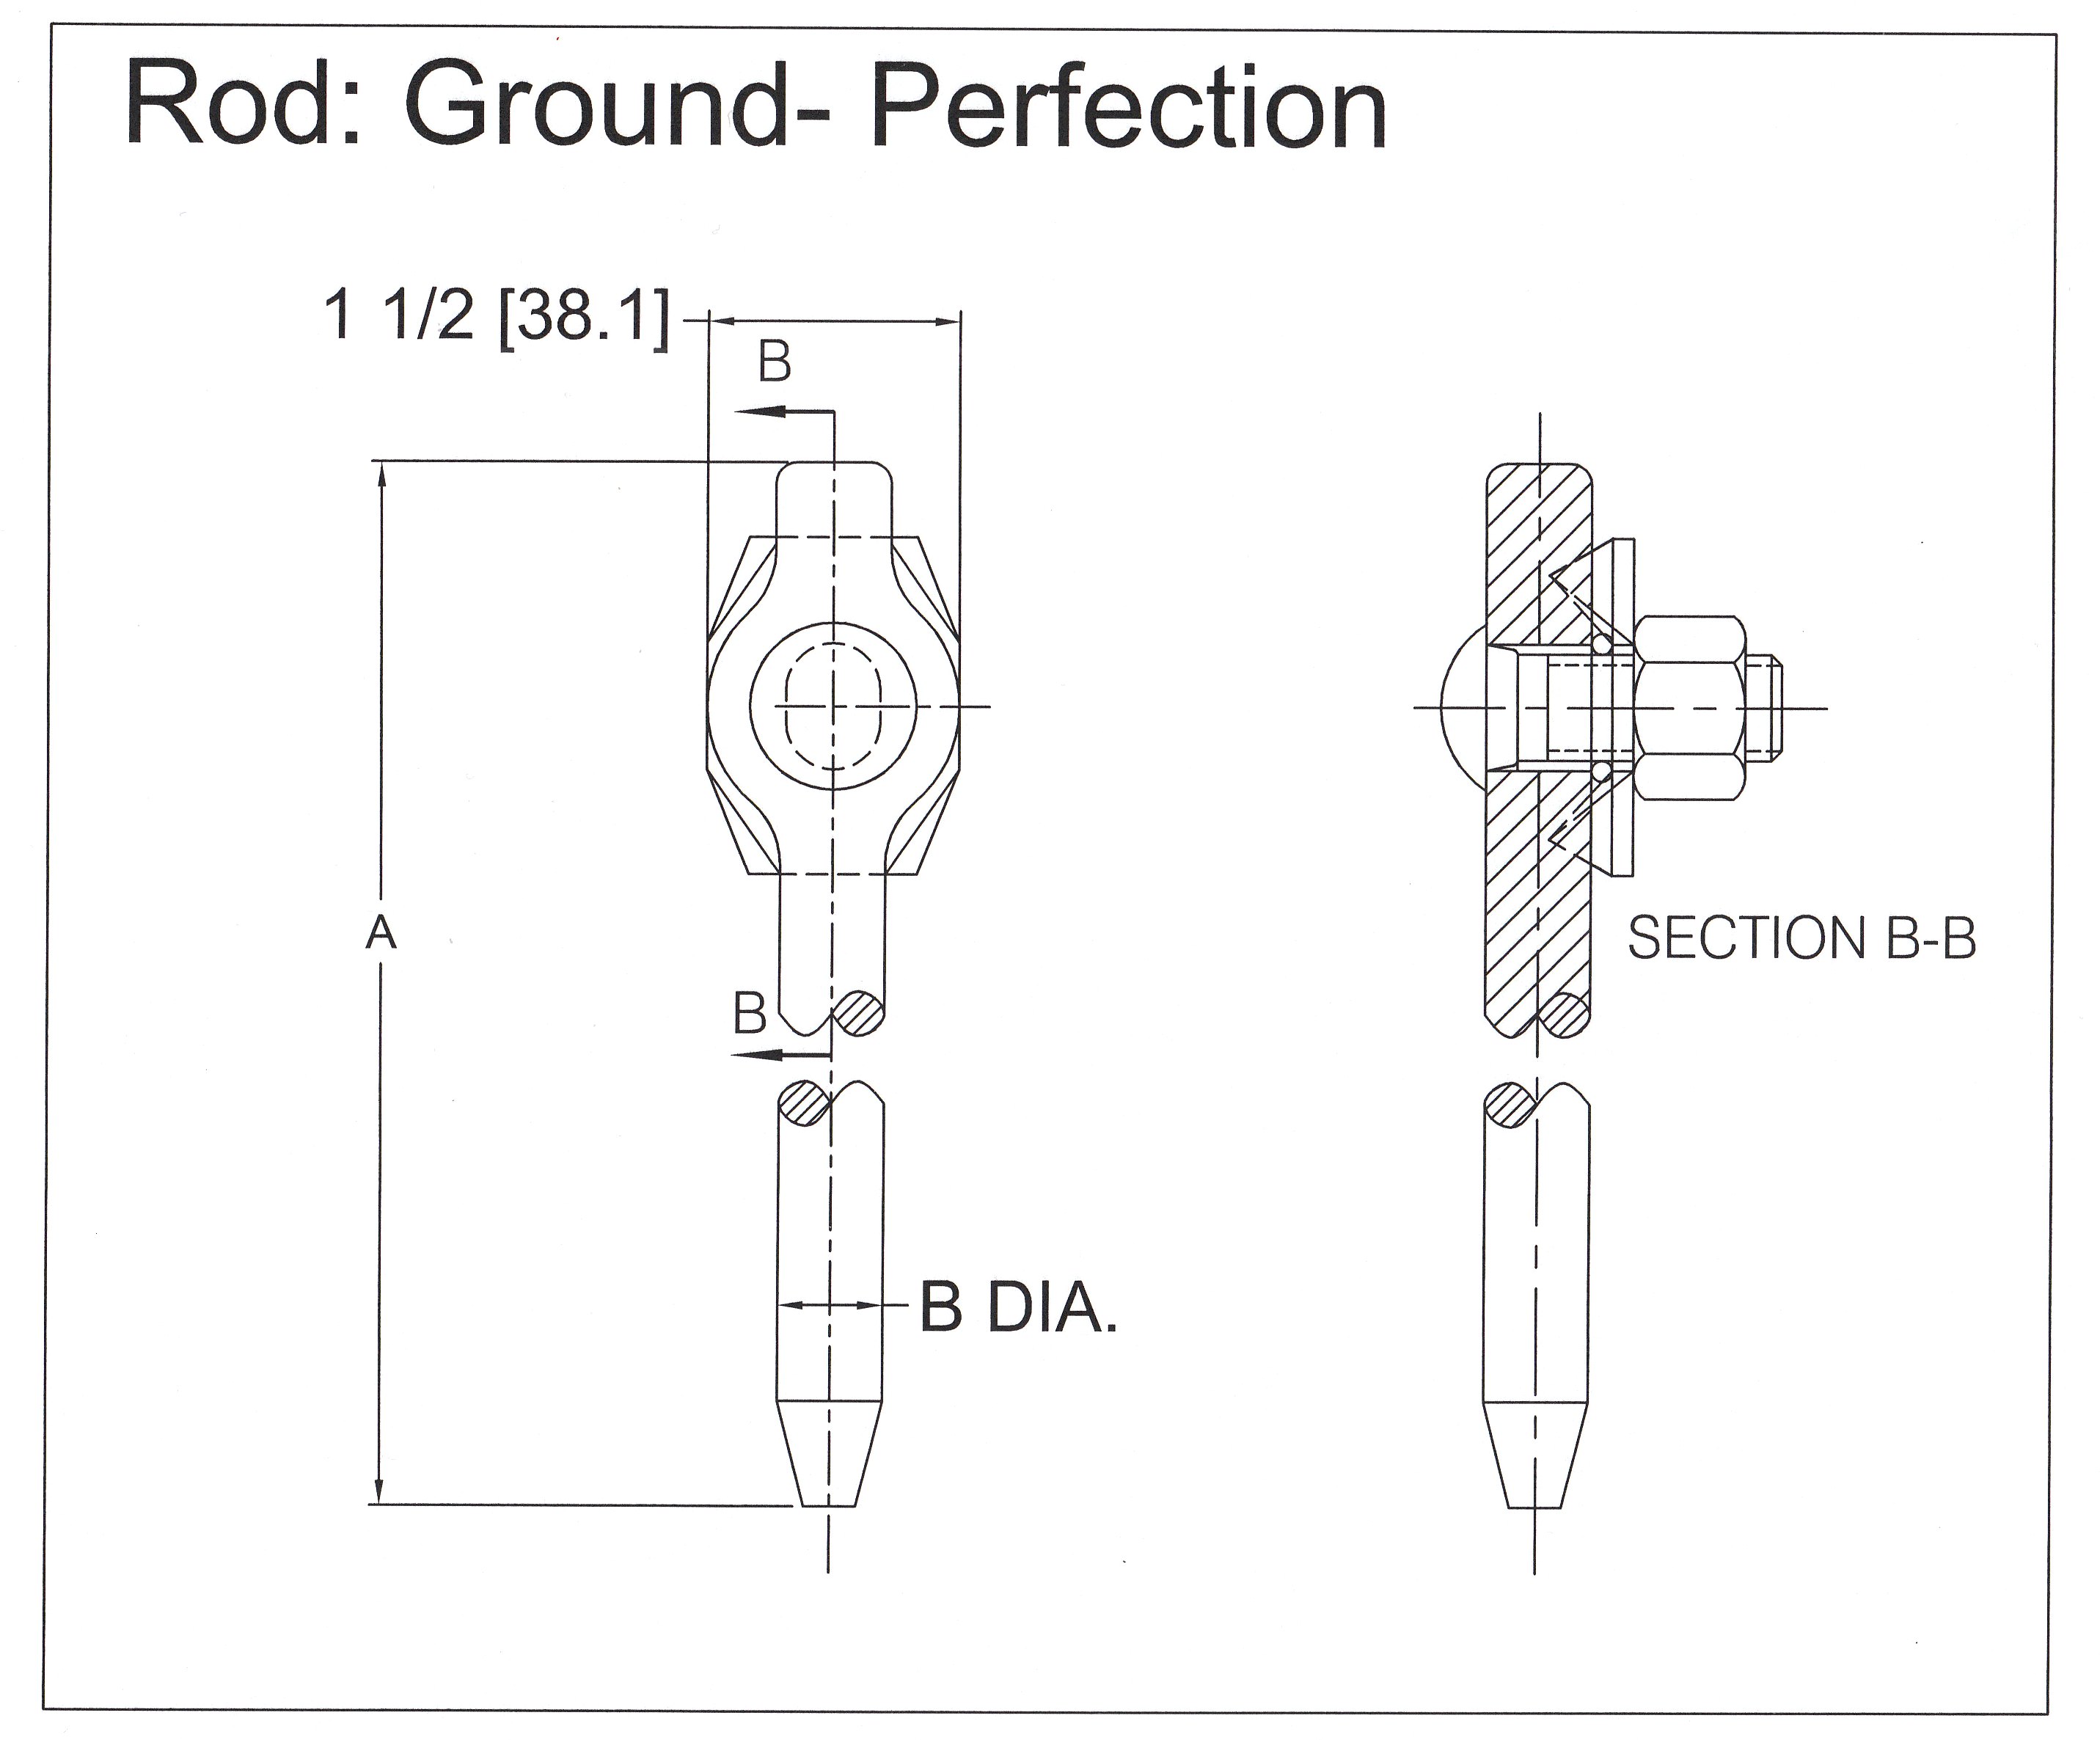 ROD GROUND-PERFECTION PAGE 1-25-1.jpg